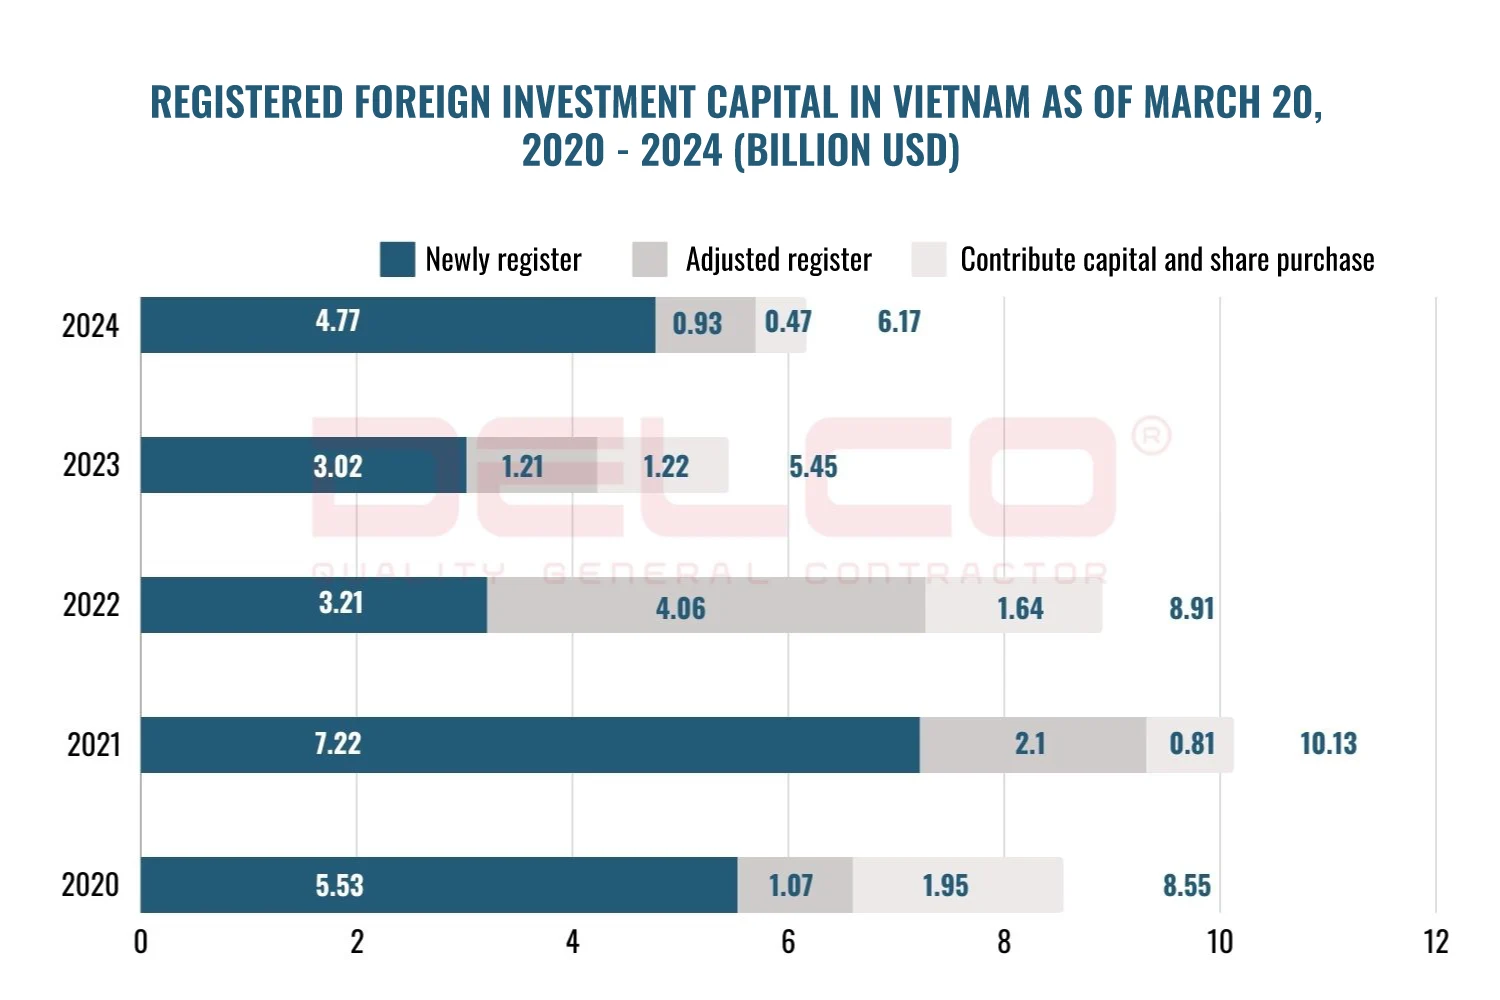 Registered foreign investment capital in Vietnam as of March 20, 2020 - 2024 (billion USD) 